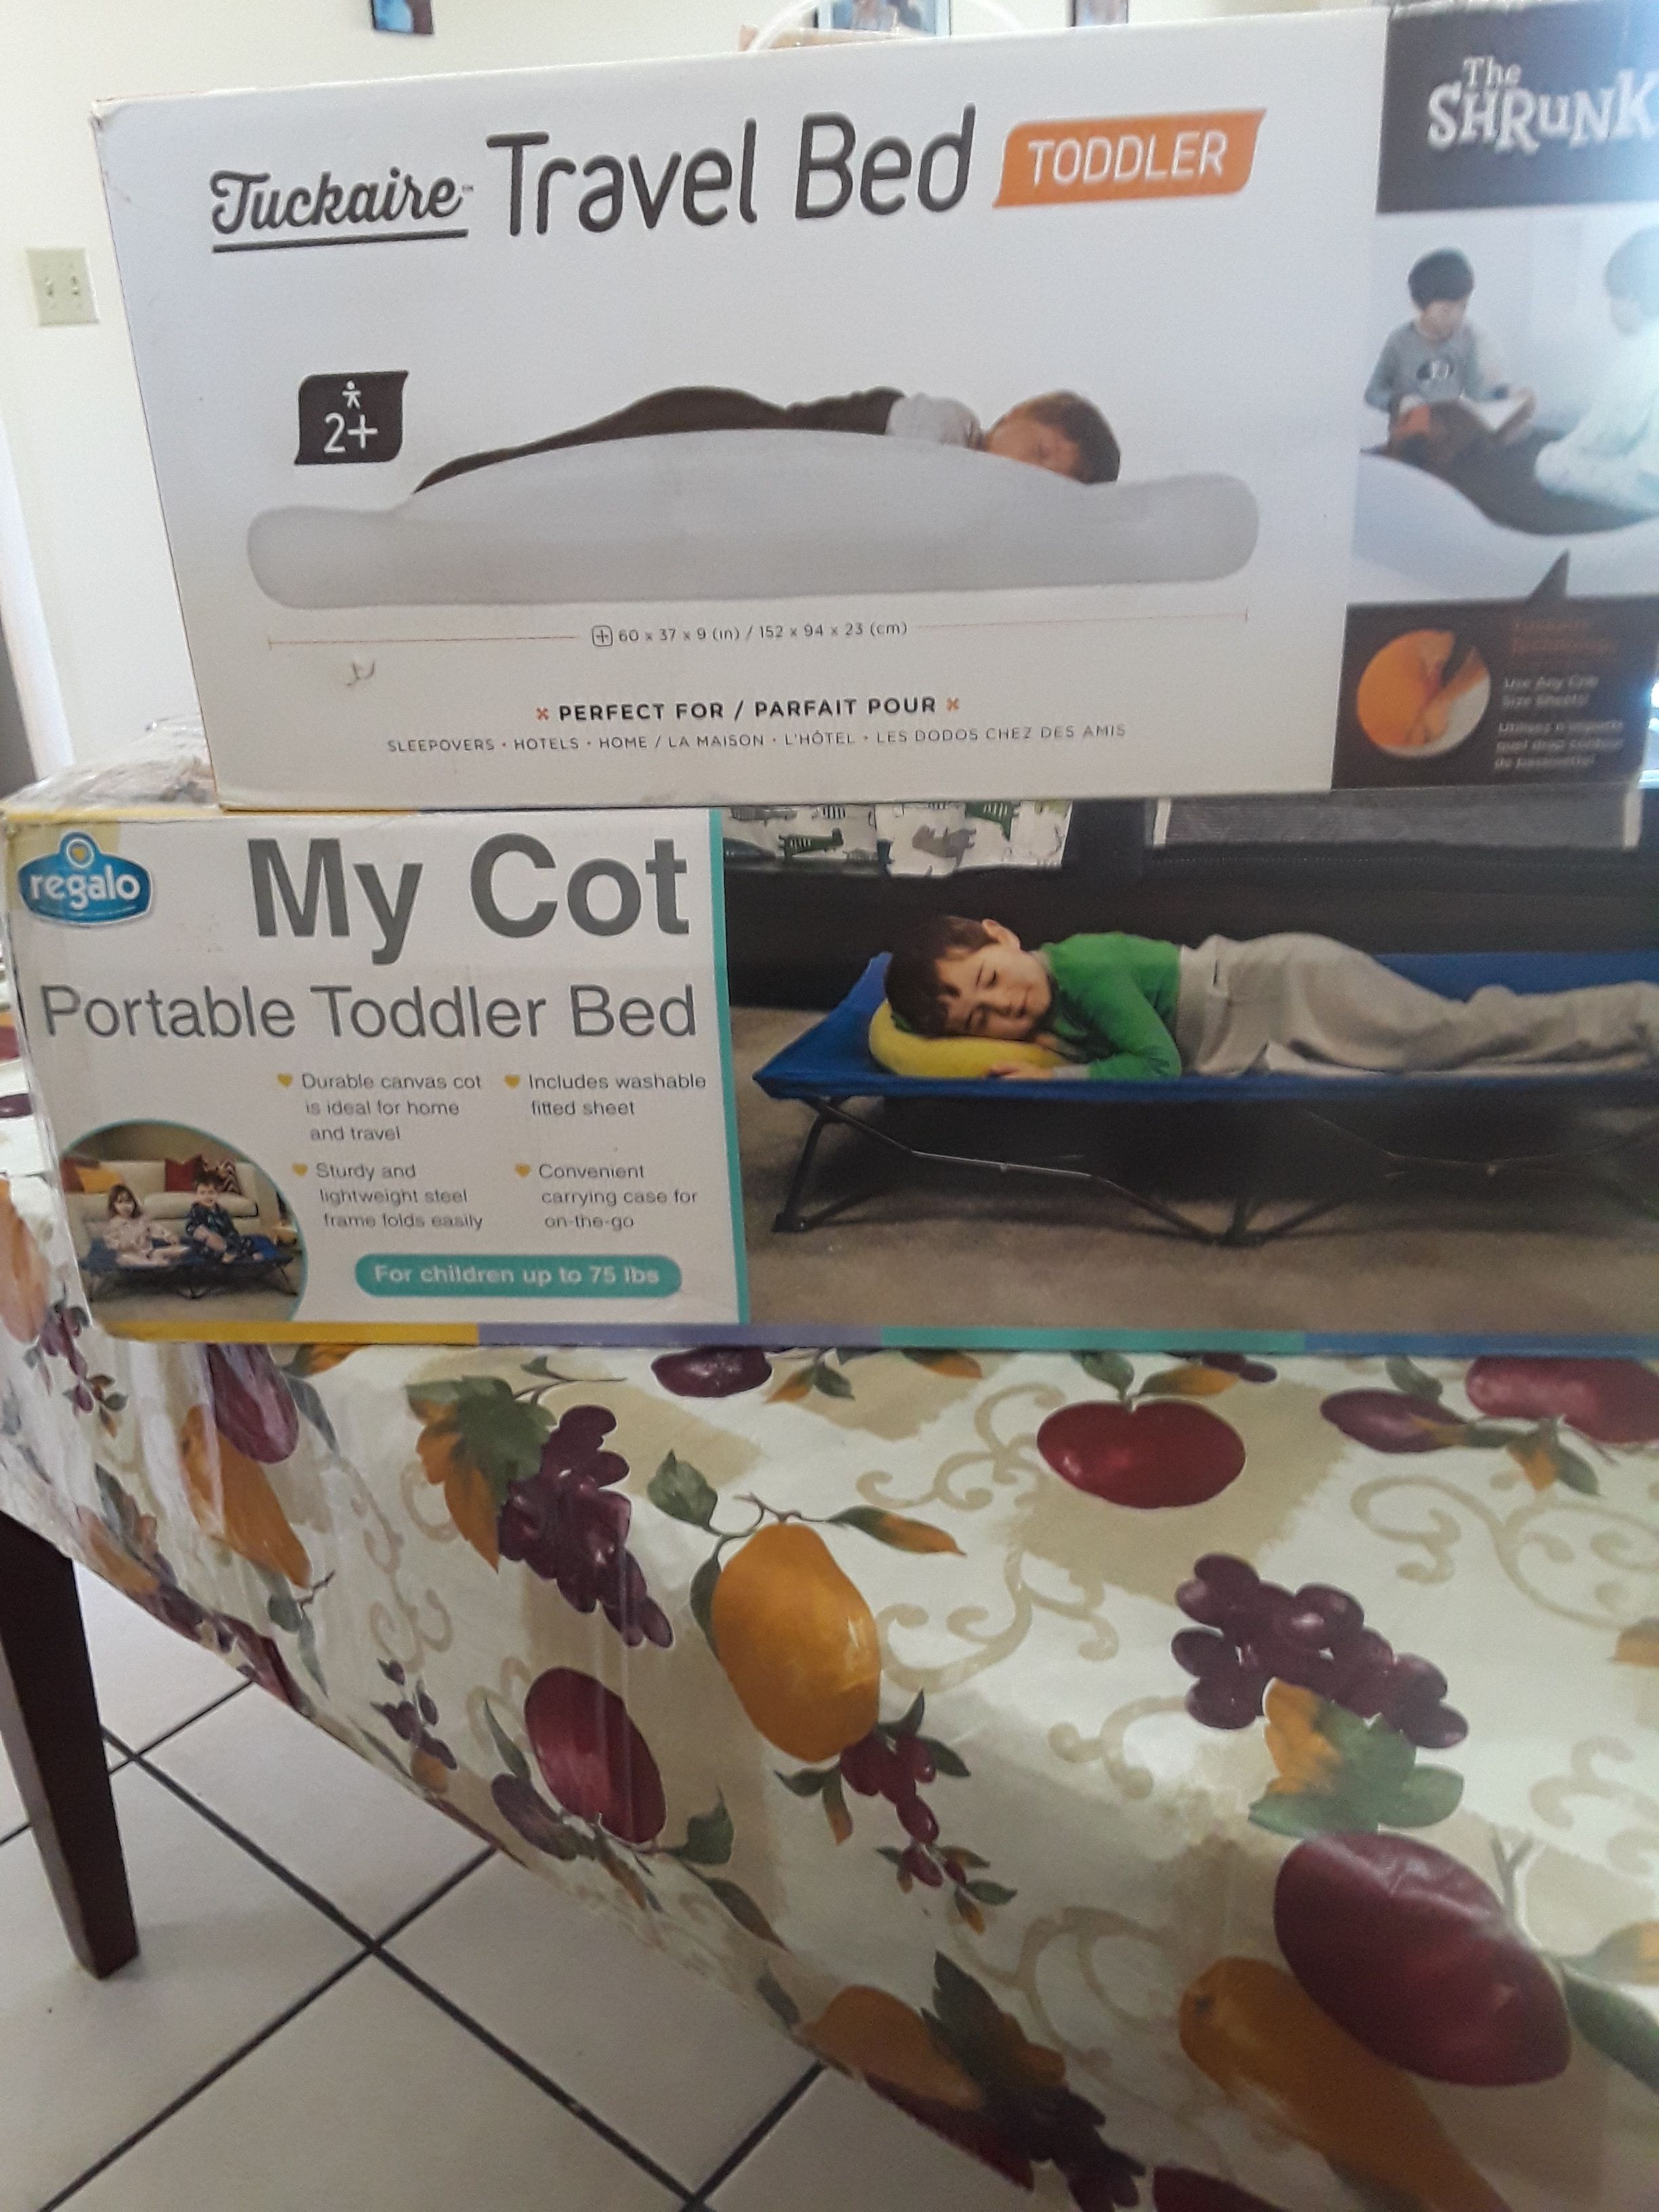 Travel bed toddler and my cot portable toddler bed